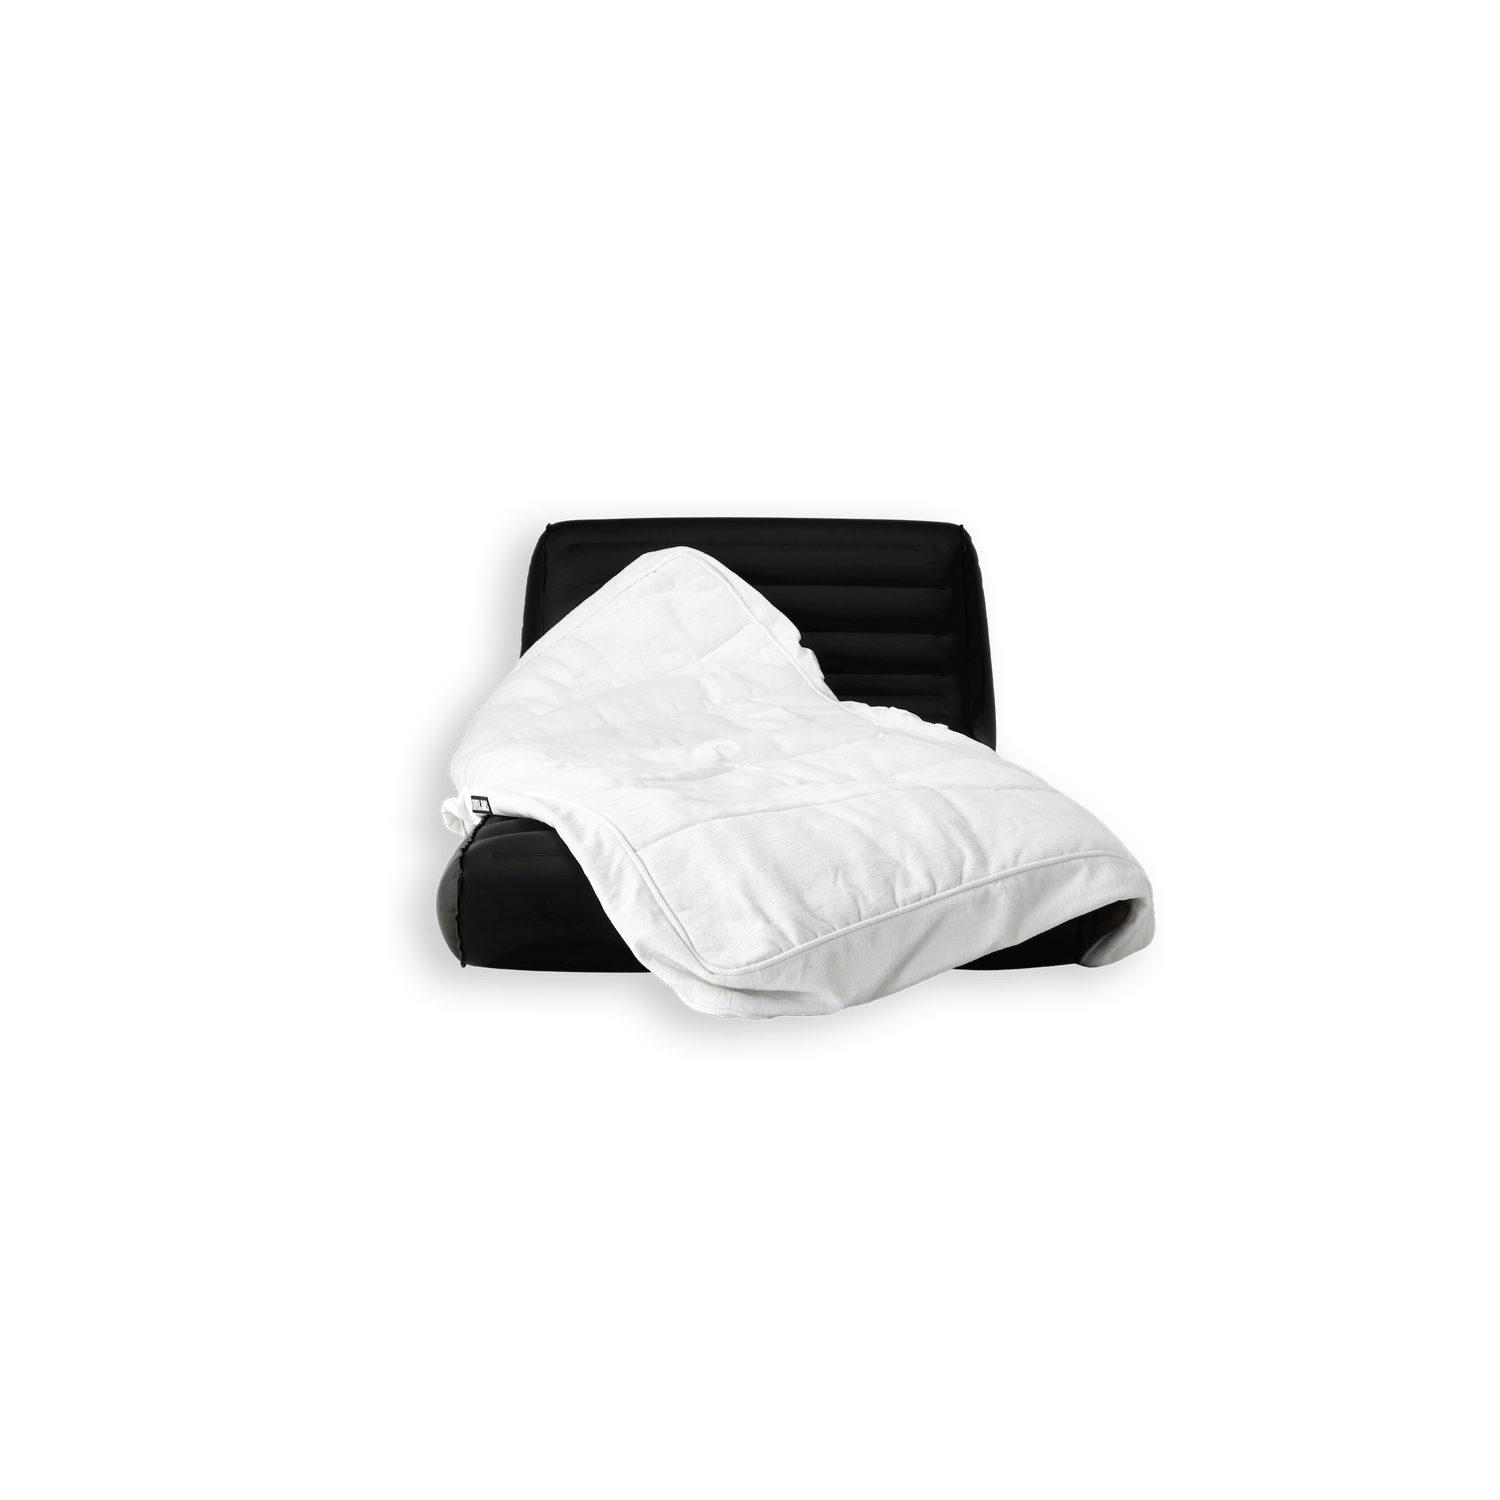 A white terry towel luxury pool float cover draped over a TPU inflatable core.